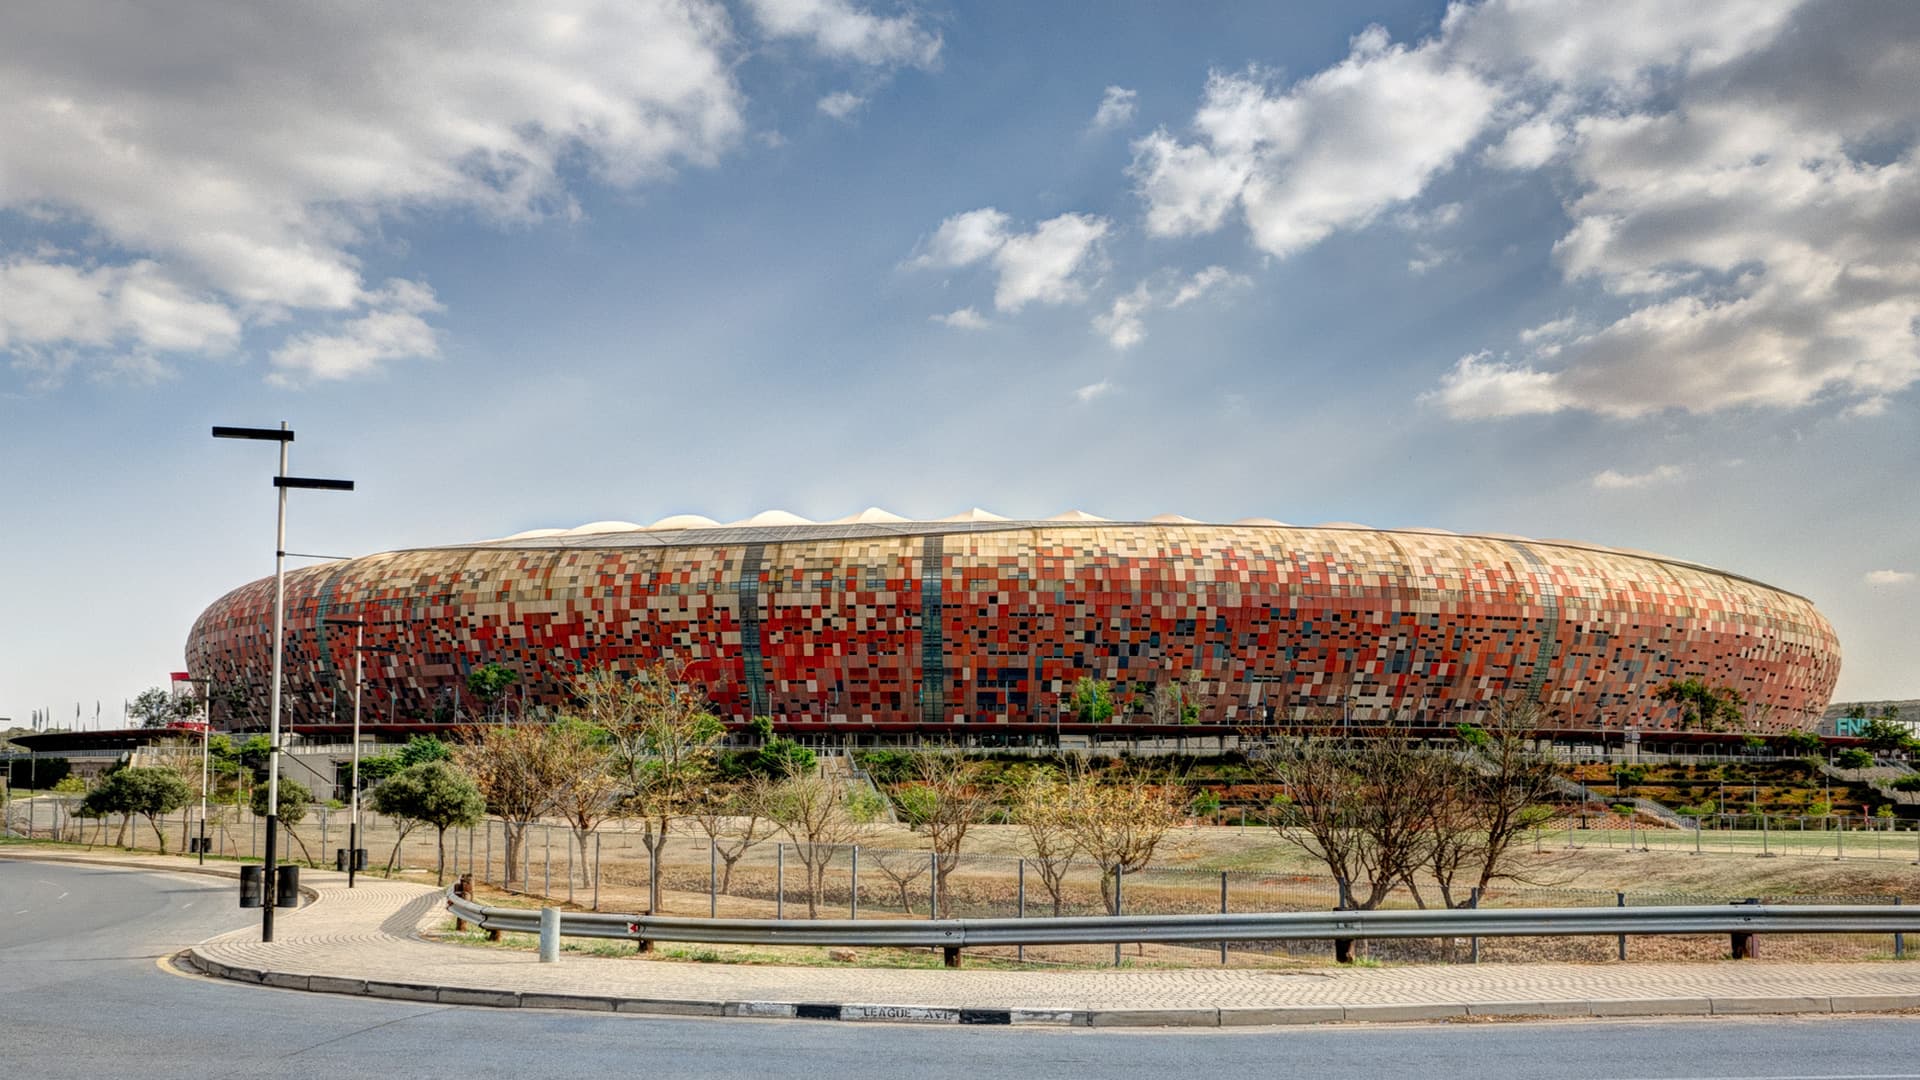 Soccer City, South Africa - most beautiful football stadium in the world